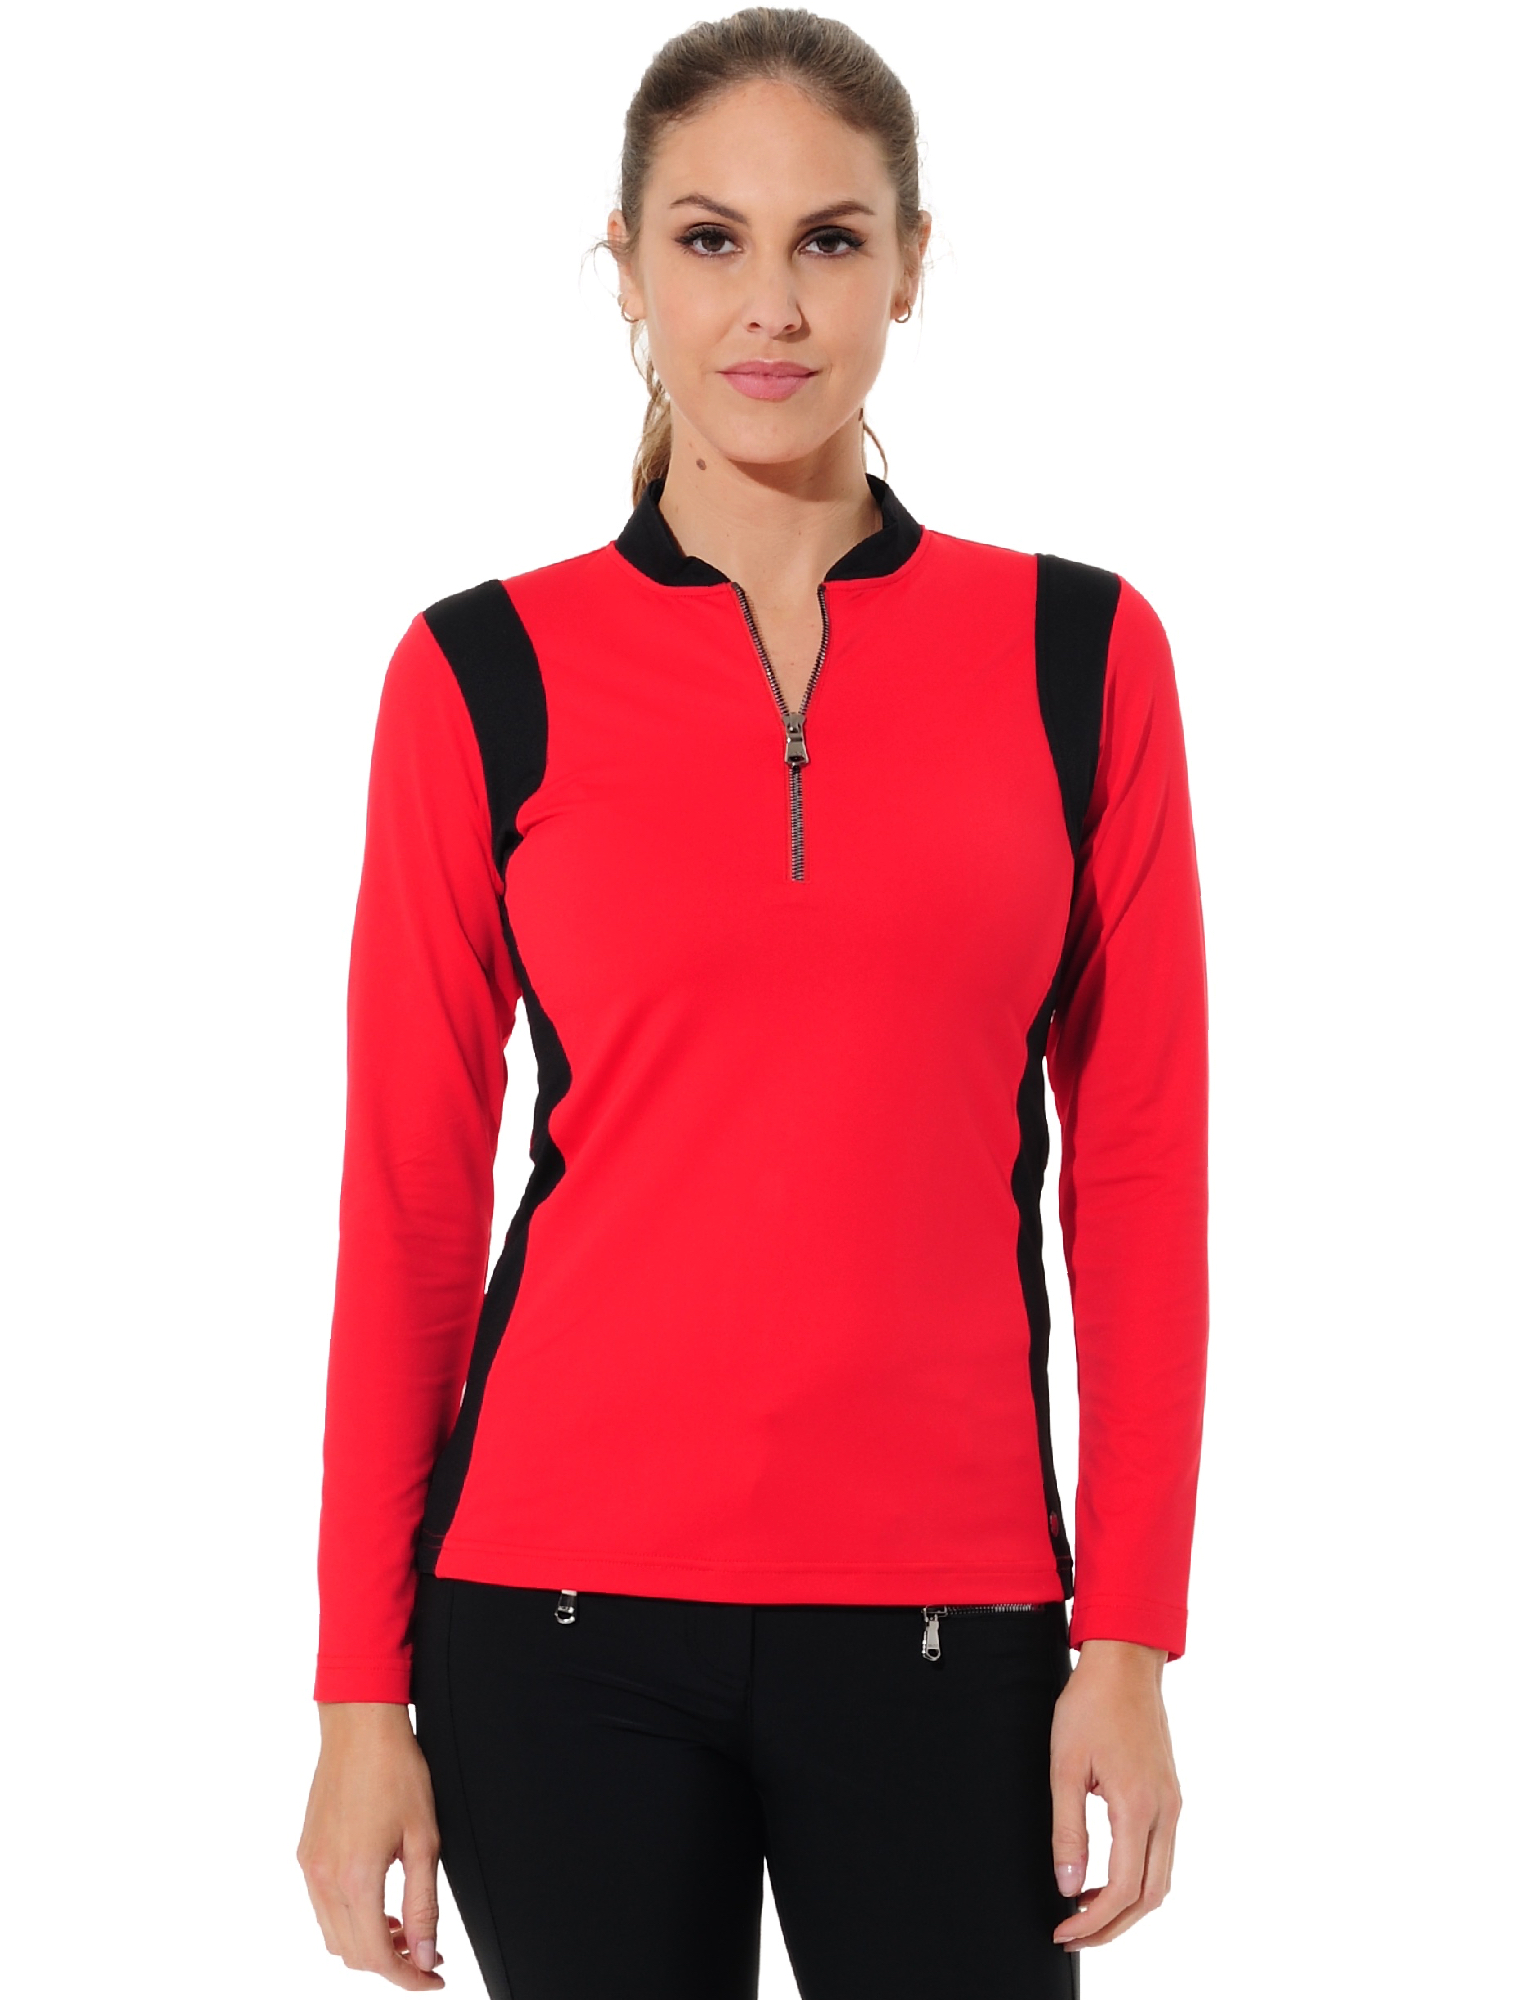 Jersey zip polo shirt red/black 